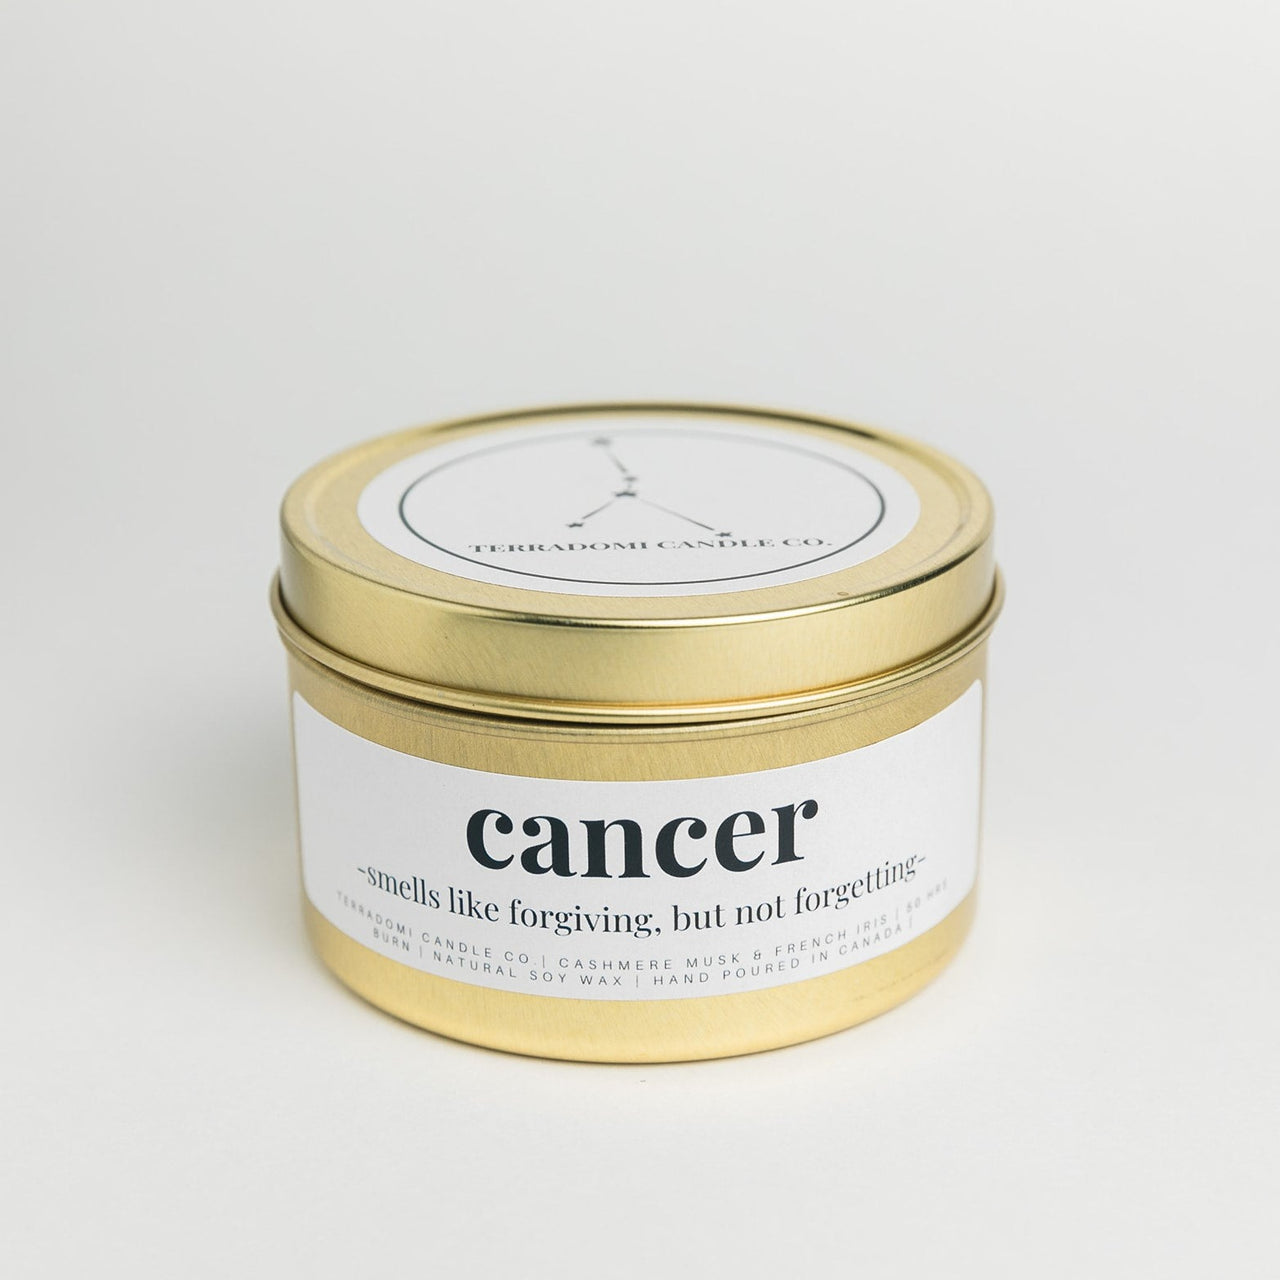 Astrology collection Cancer sign candle